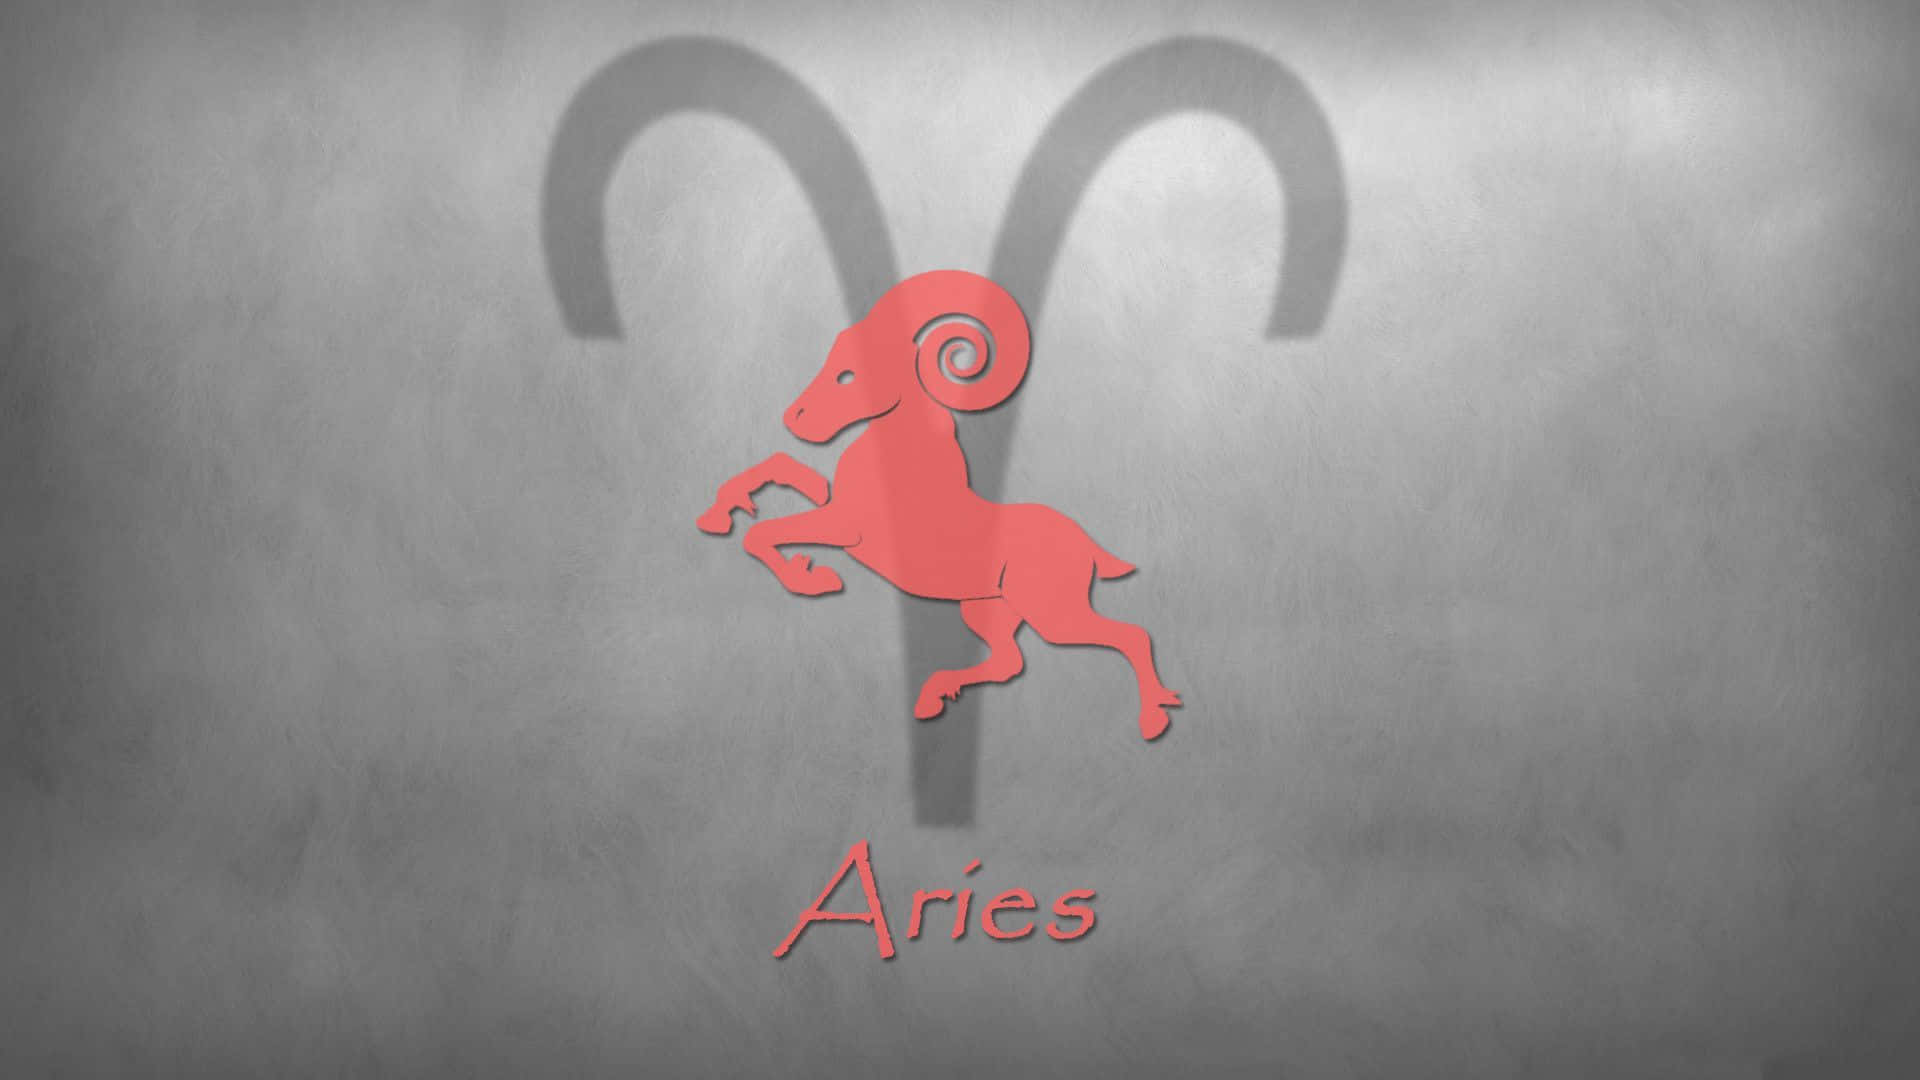 Aries Zodiac Sign Symbolizing Fire and Strength